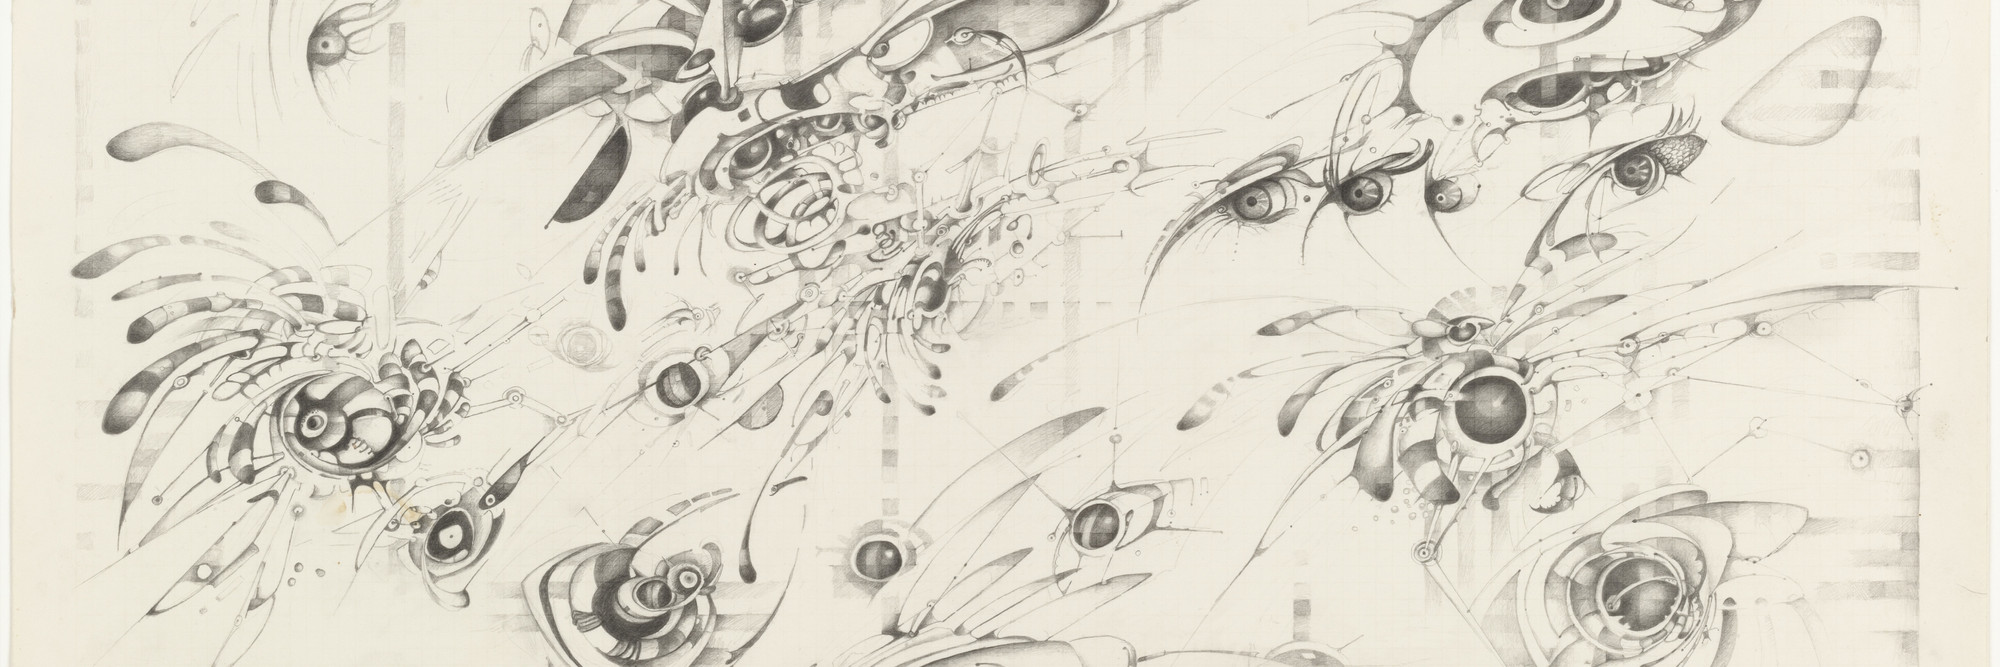 Lee Bontecou. Untitled. 1997. Pencil on graph paper, 22 × 30″ (55.9 × 76.2 cm). The Judith Rothschild Foundation Contemporary Drawings Collection Gift. © 2016 Lee Bontecou